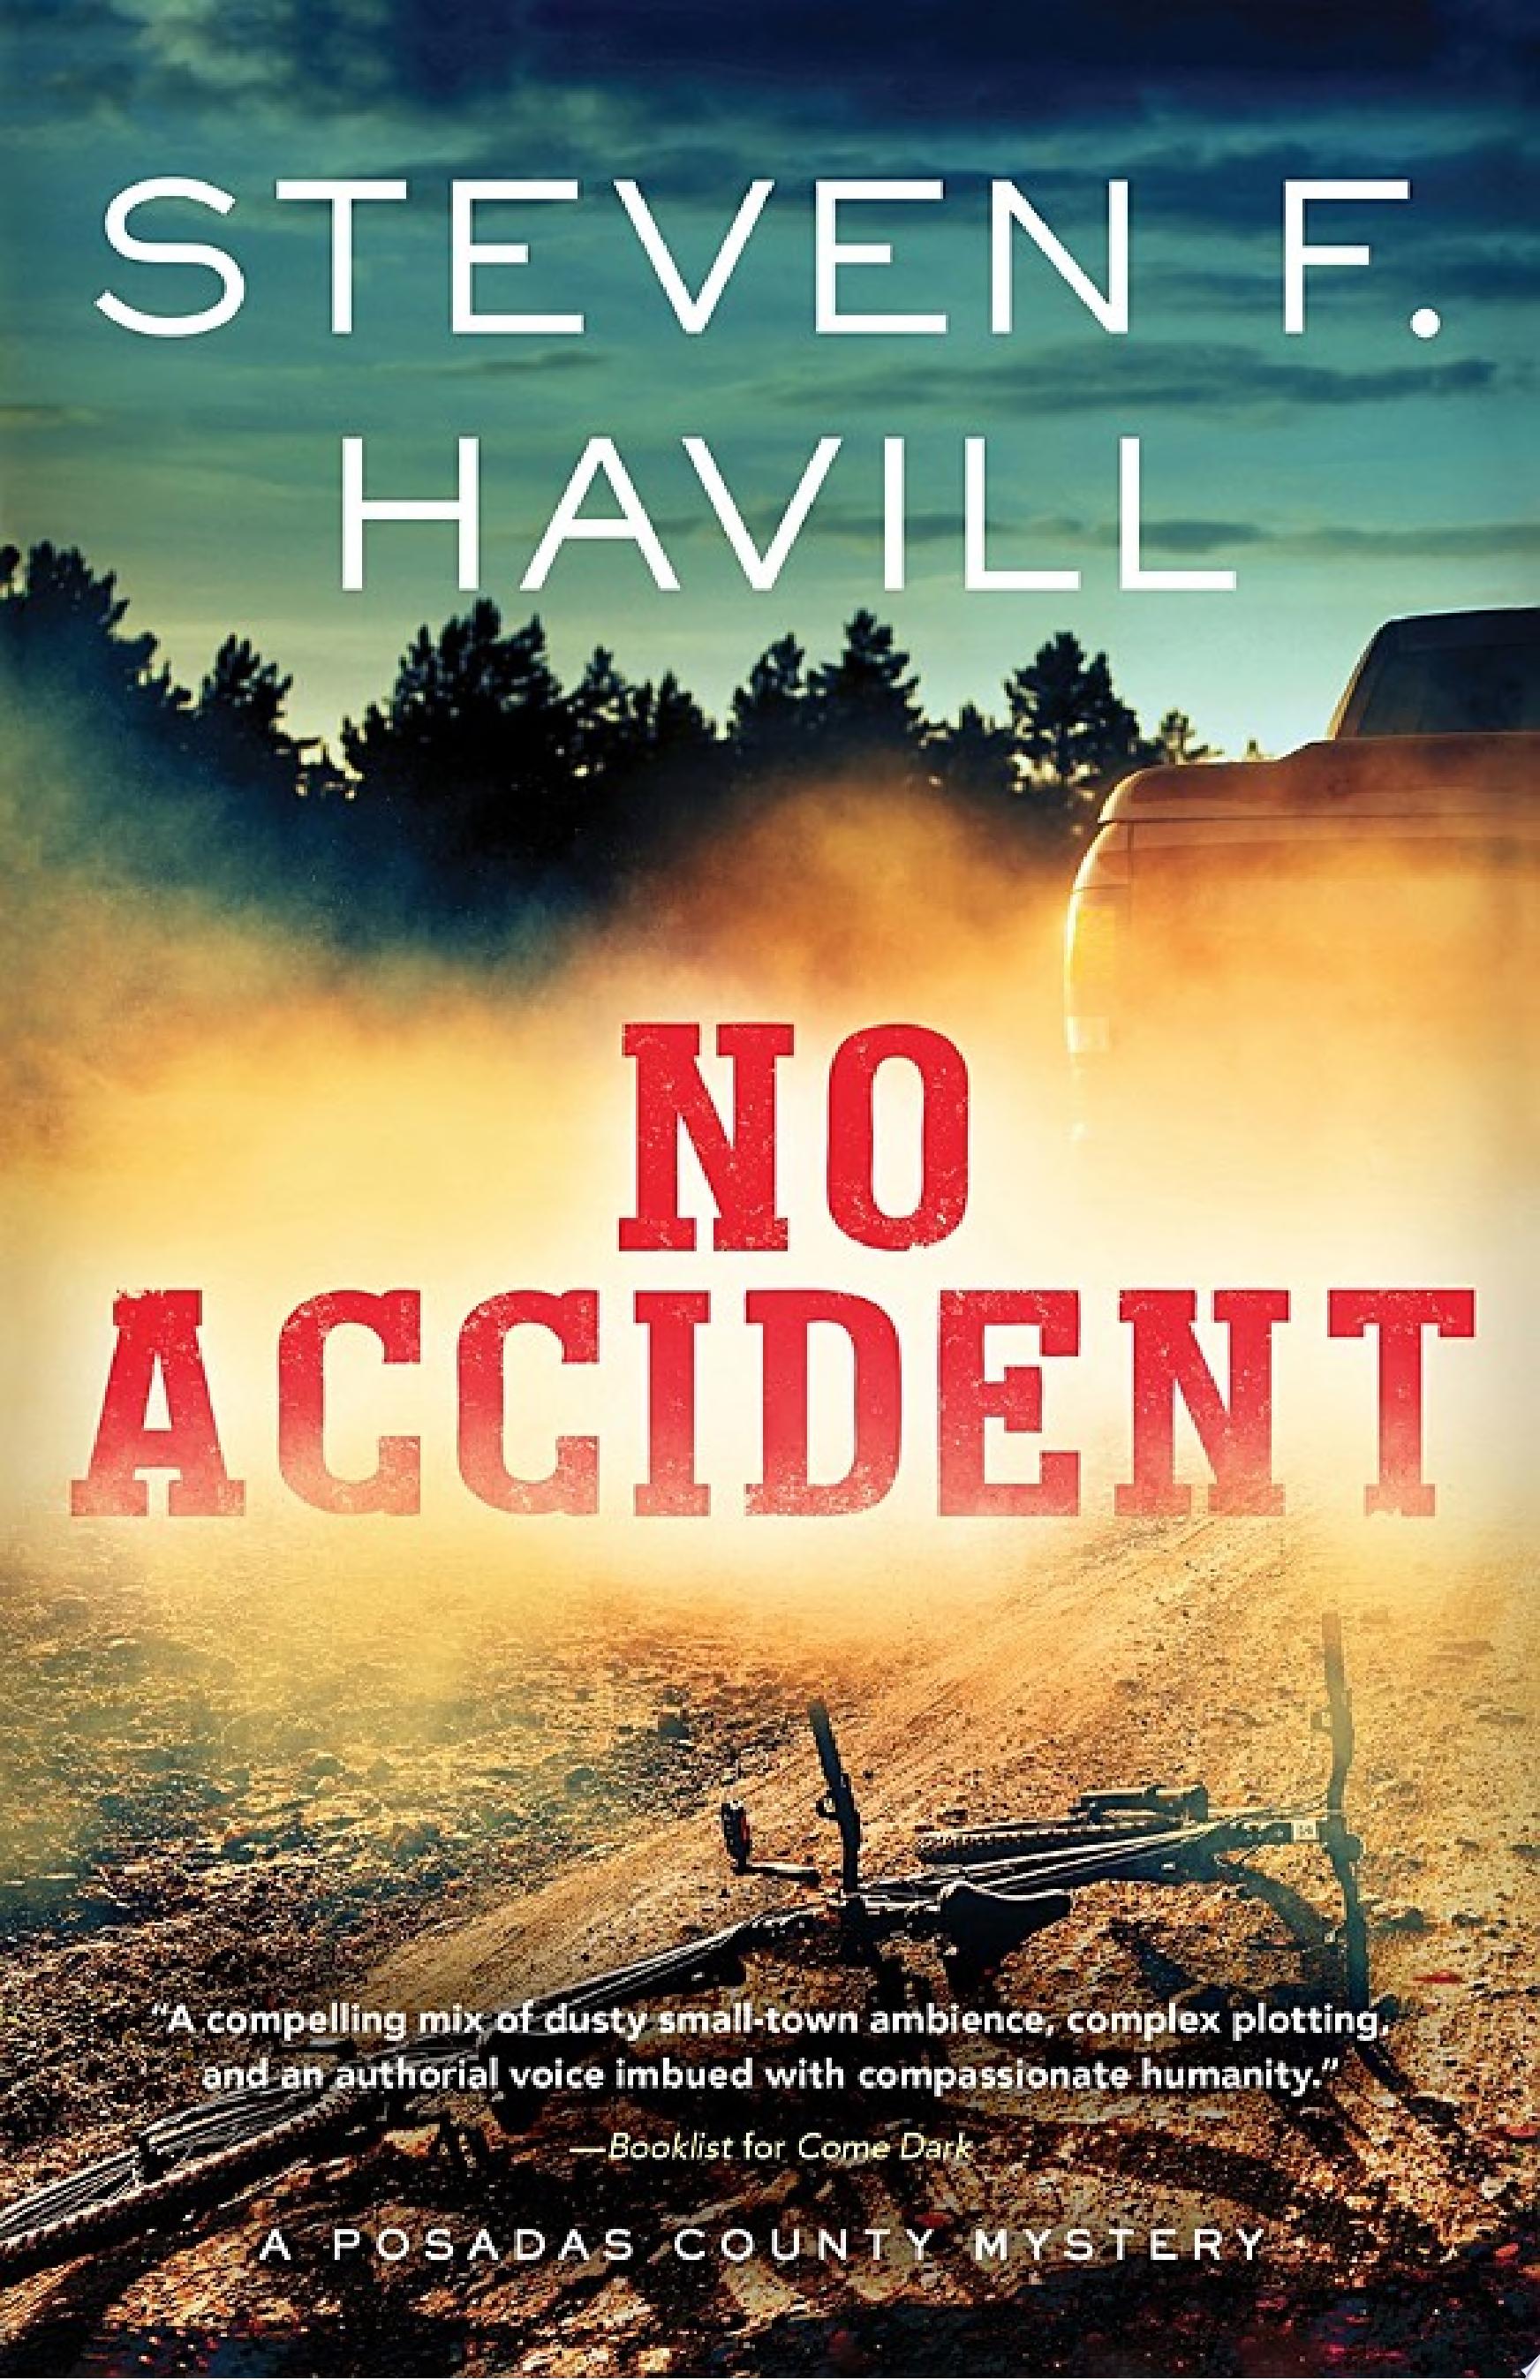 Image for "No Accident"